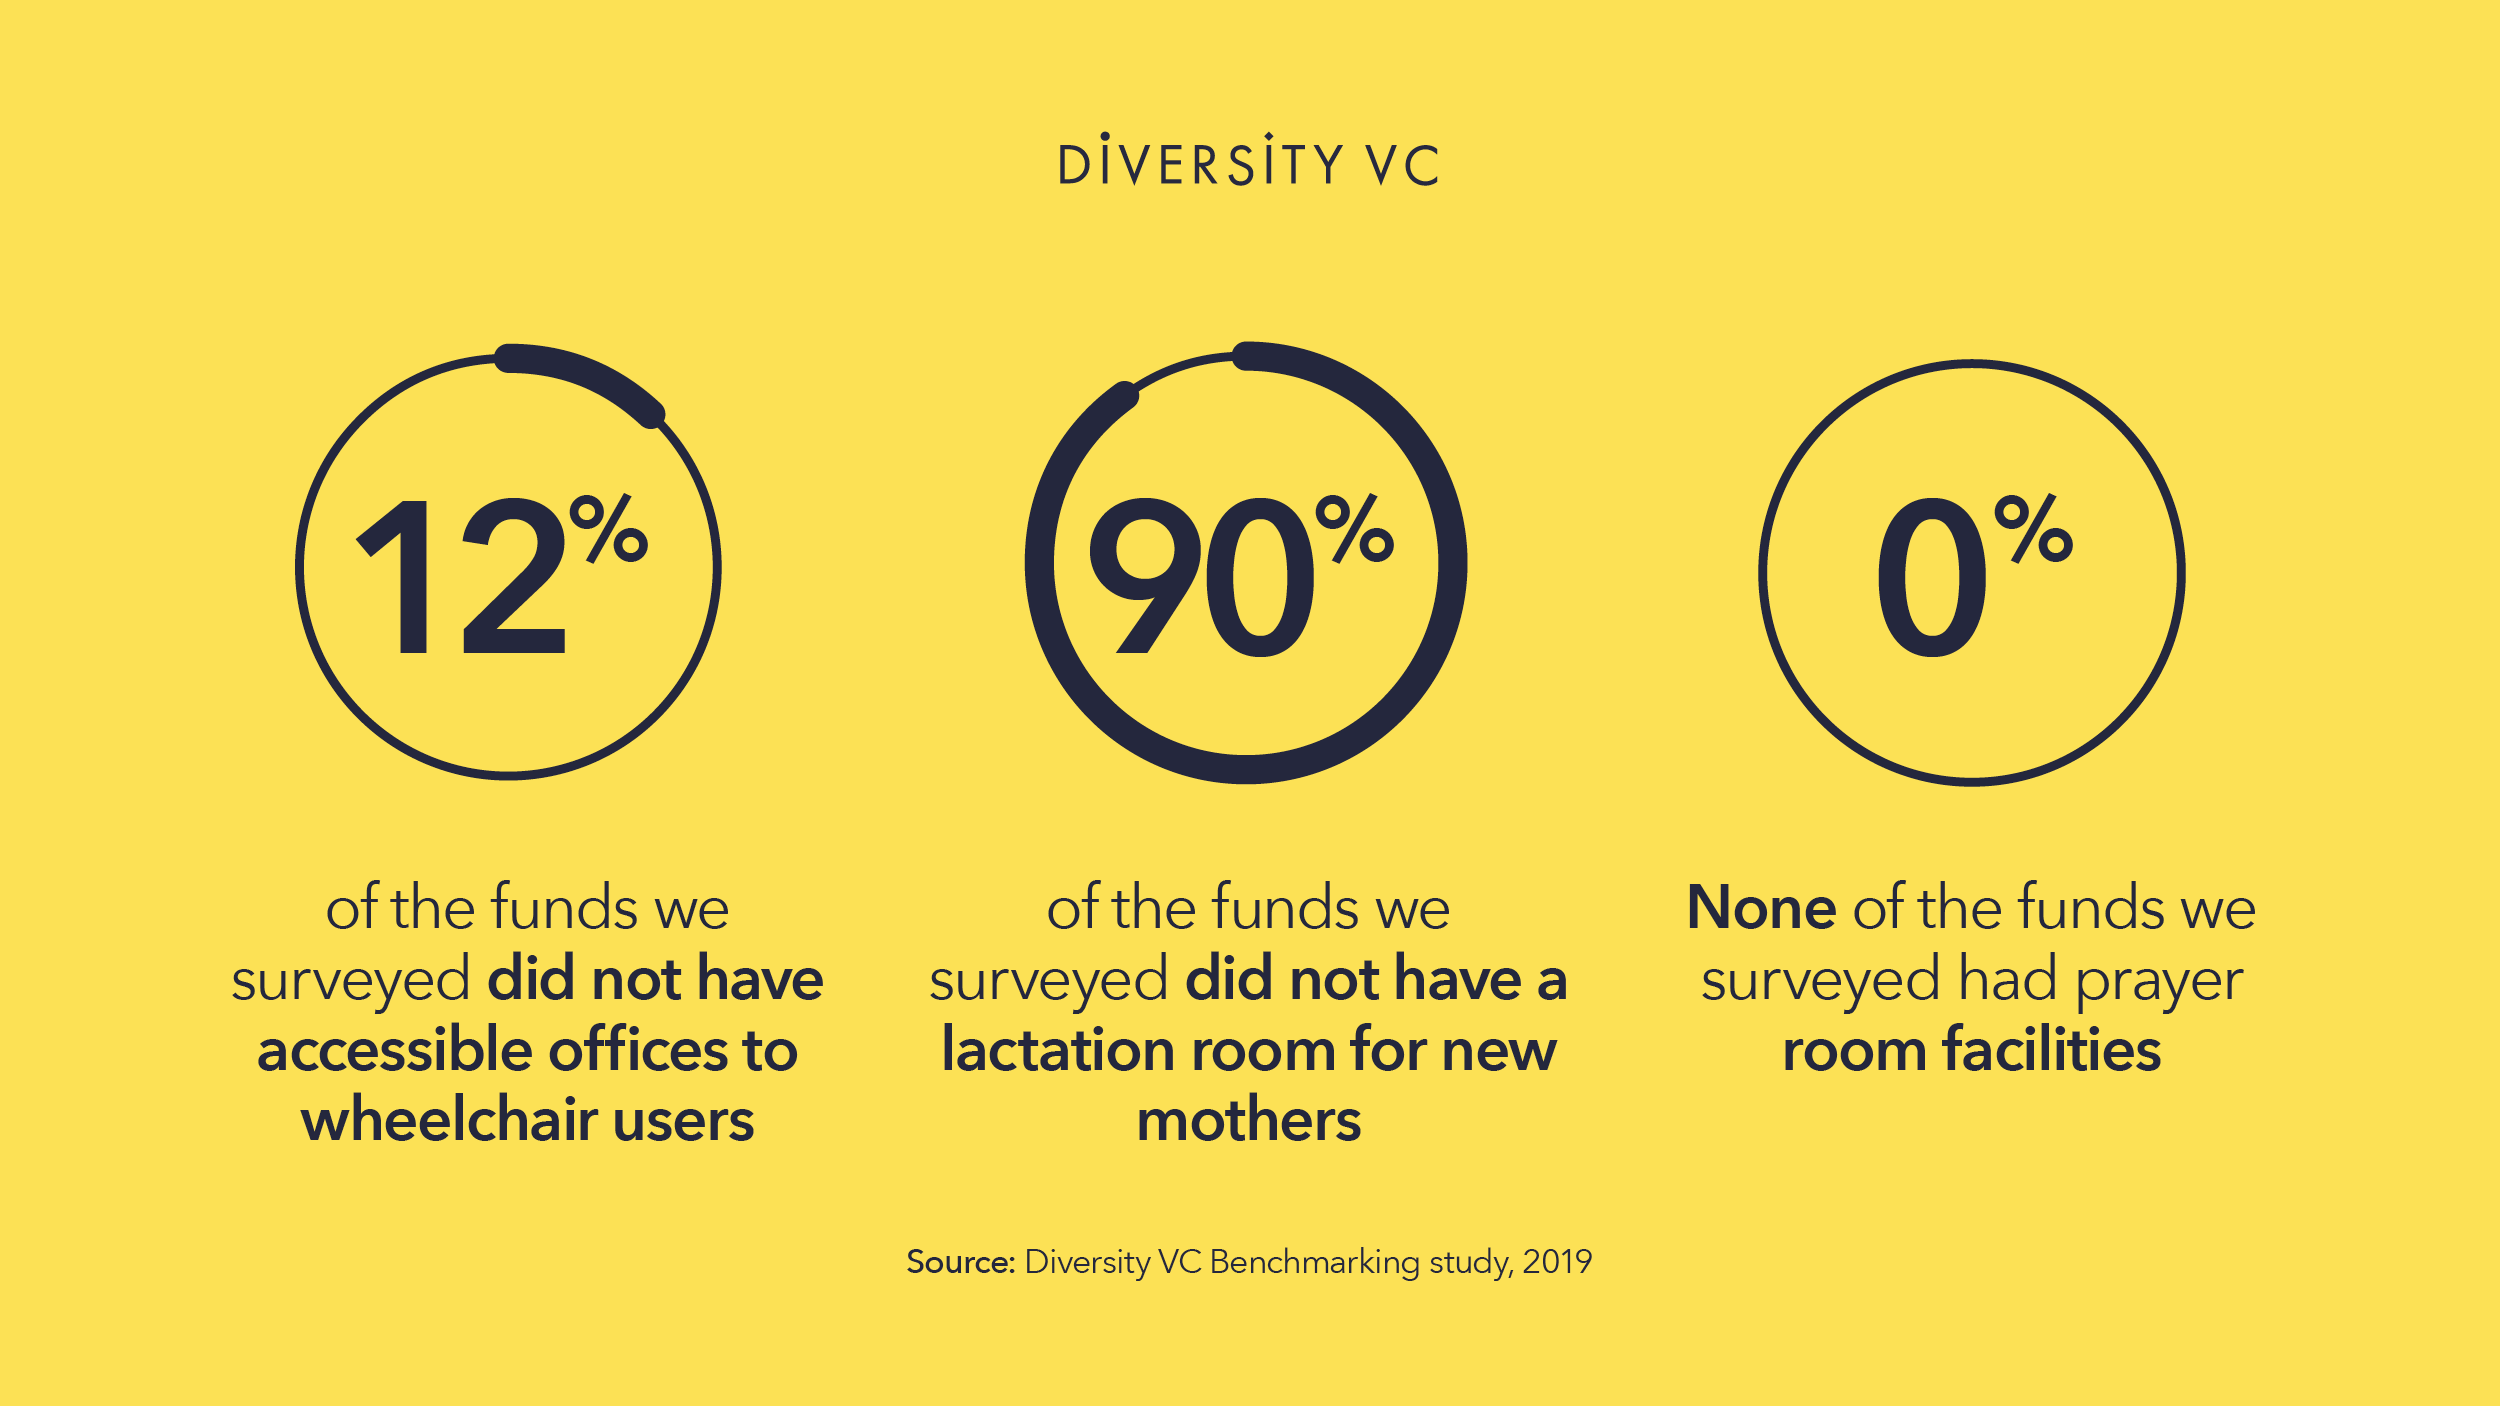 Graphic: 0% of London VC funds have prayer room facilities